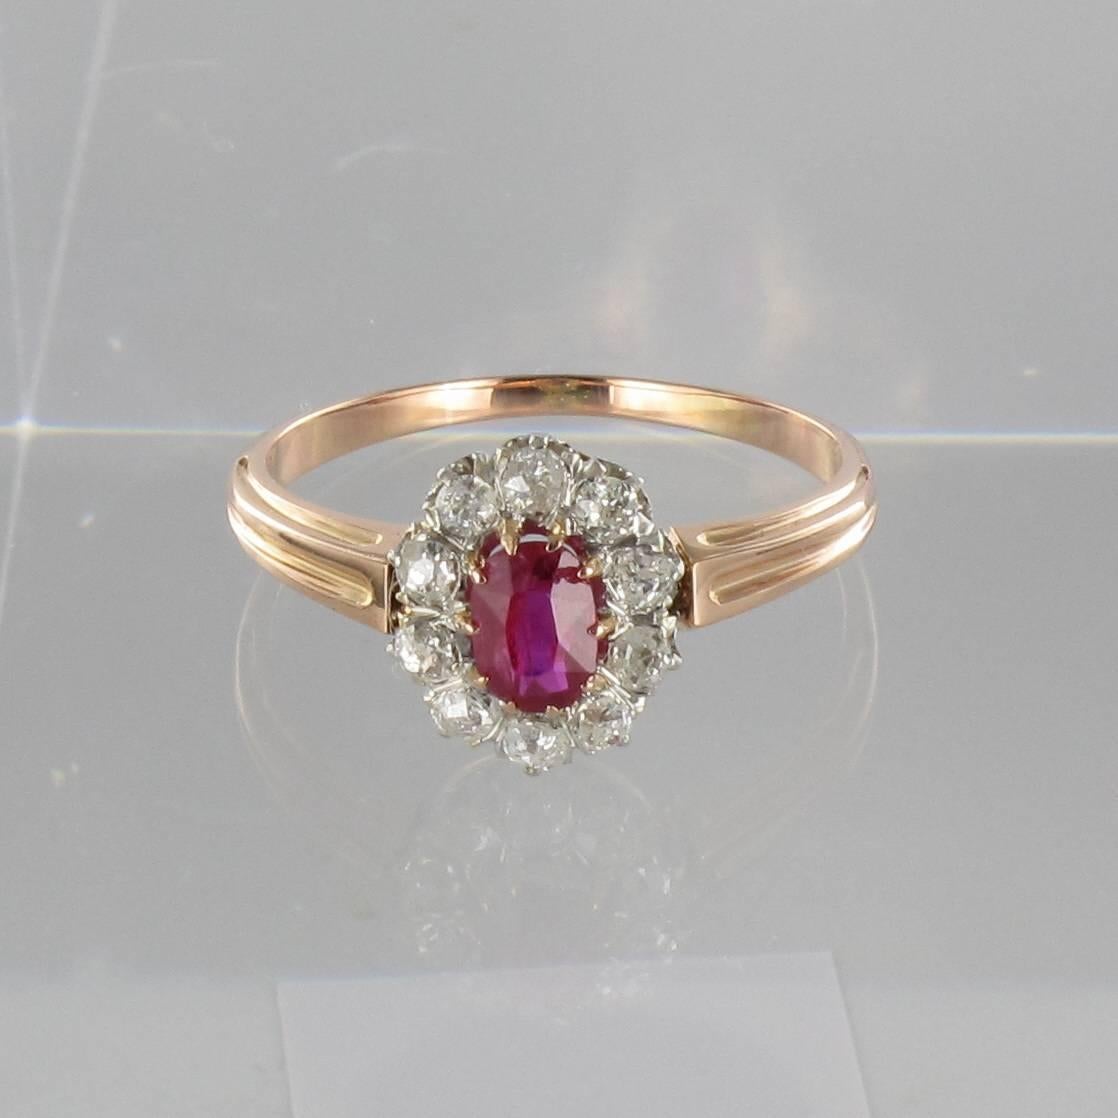 Ring in 18k rose gold, eagle head hallmark.

This ravishing antique ring could be described as femininity incarnate! The centrepiece is a ruby with raspberry tints that harmonises beautifully with the rose gold of the ring band. 10 perfectly